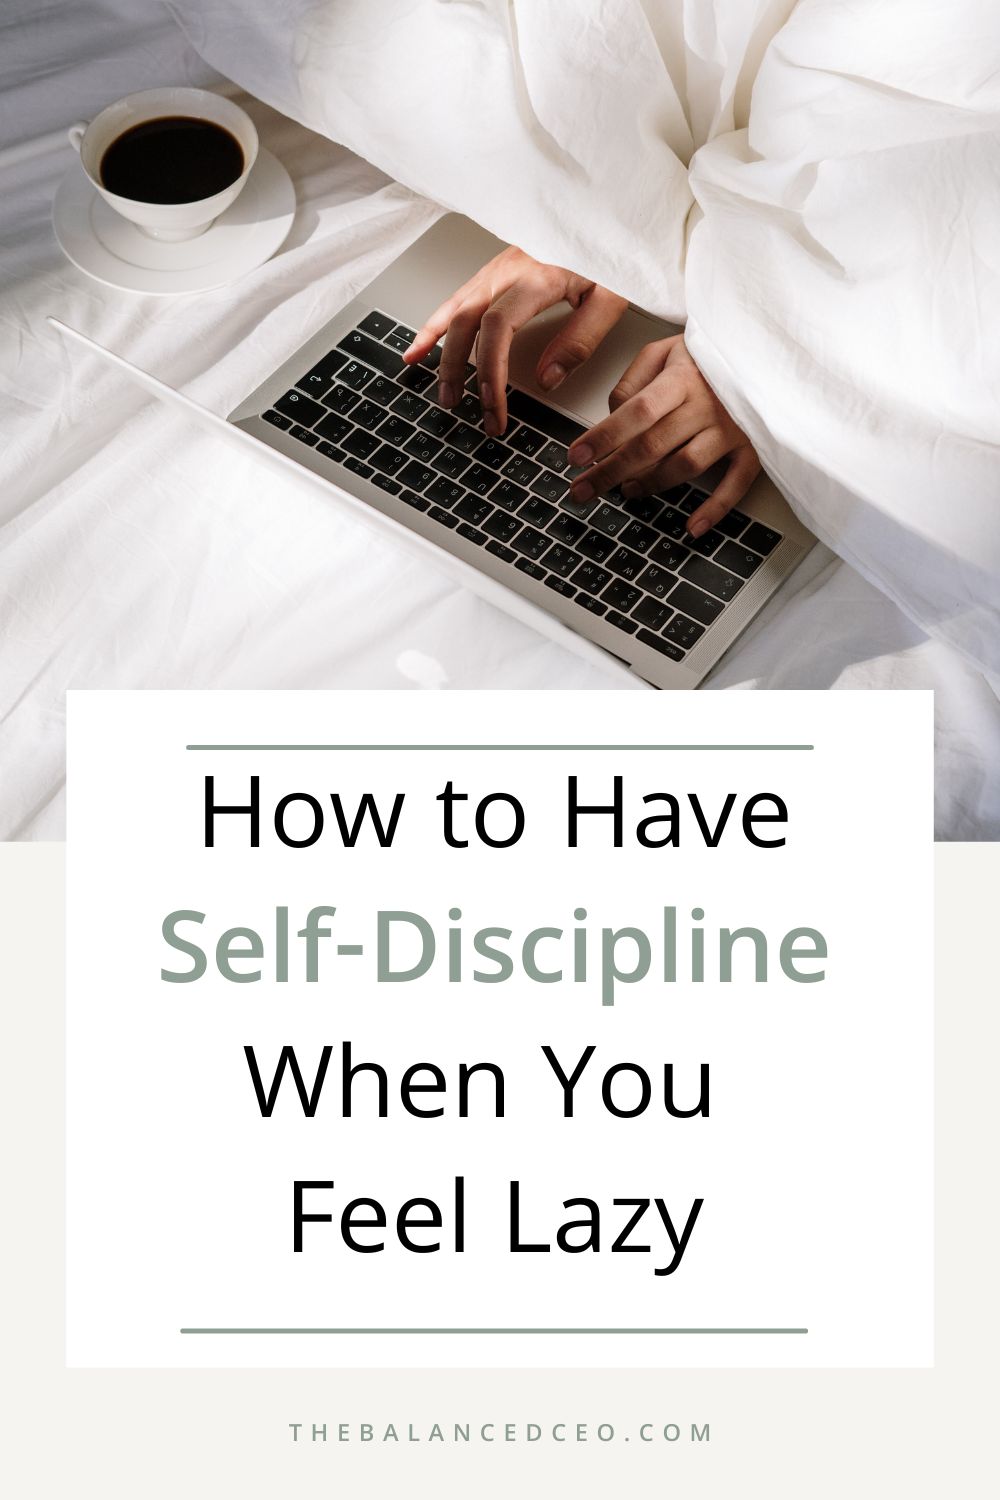 How to Have Self-Discipline When You Feel Lazy